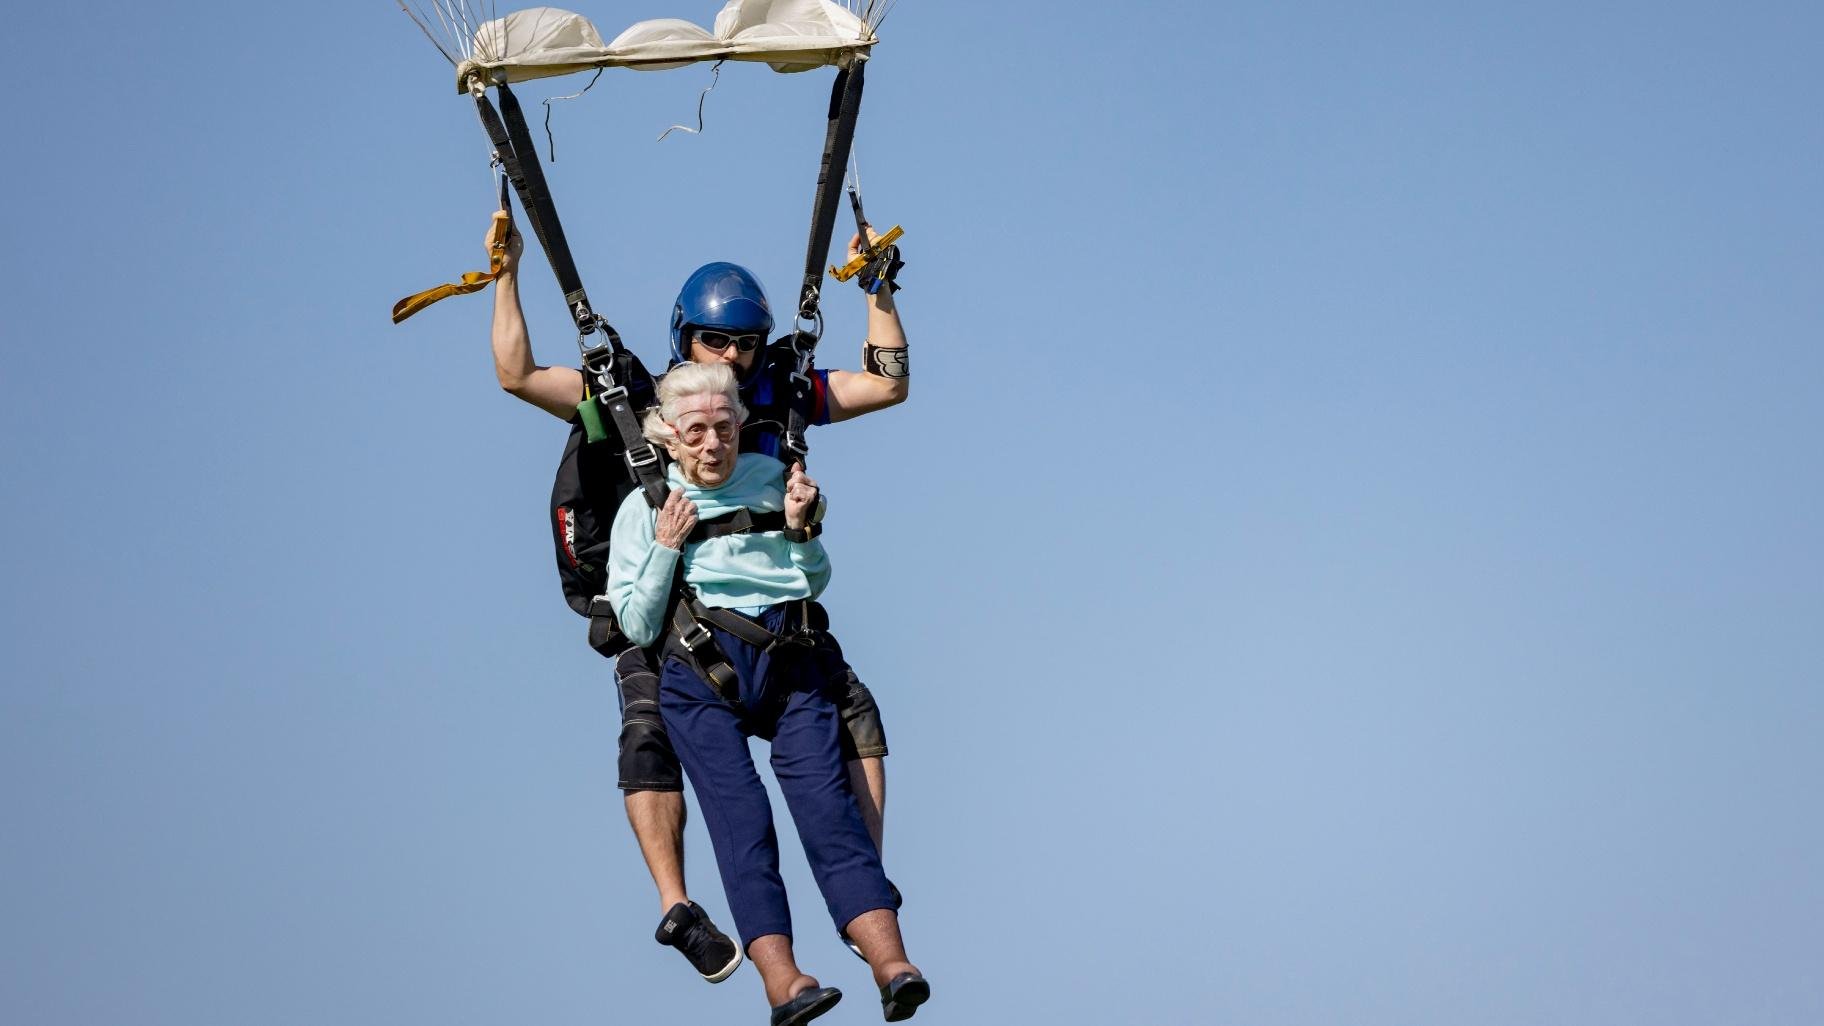 Dorothy Hoffner, 104, becomes the oldest person in the world to skydive with tandem jumper Derek Baxter on Sunday, Oct. 1, 2023, at Skydive Chicago in Ottawa, Ill. (Brian Cassella / Chicago Tribune via AP)